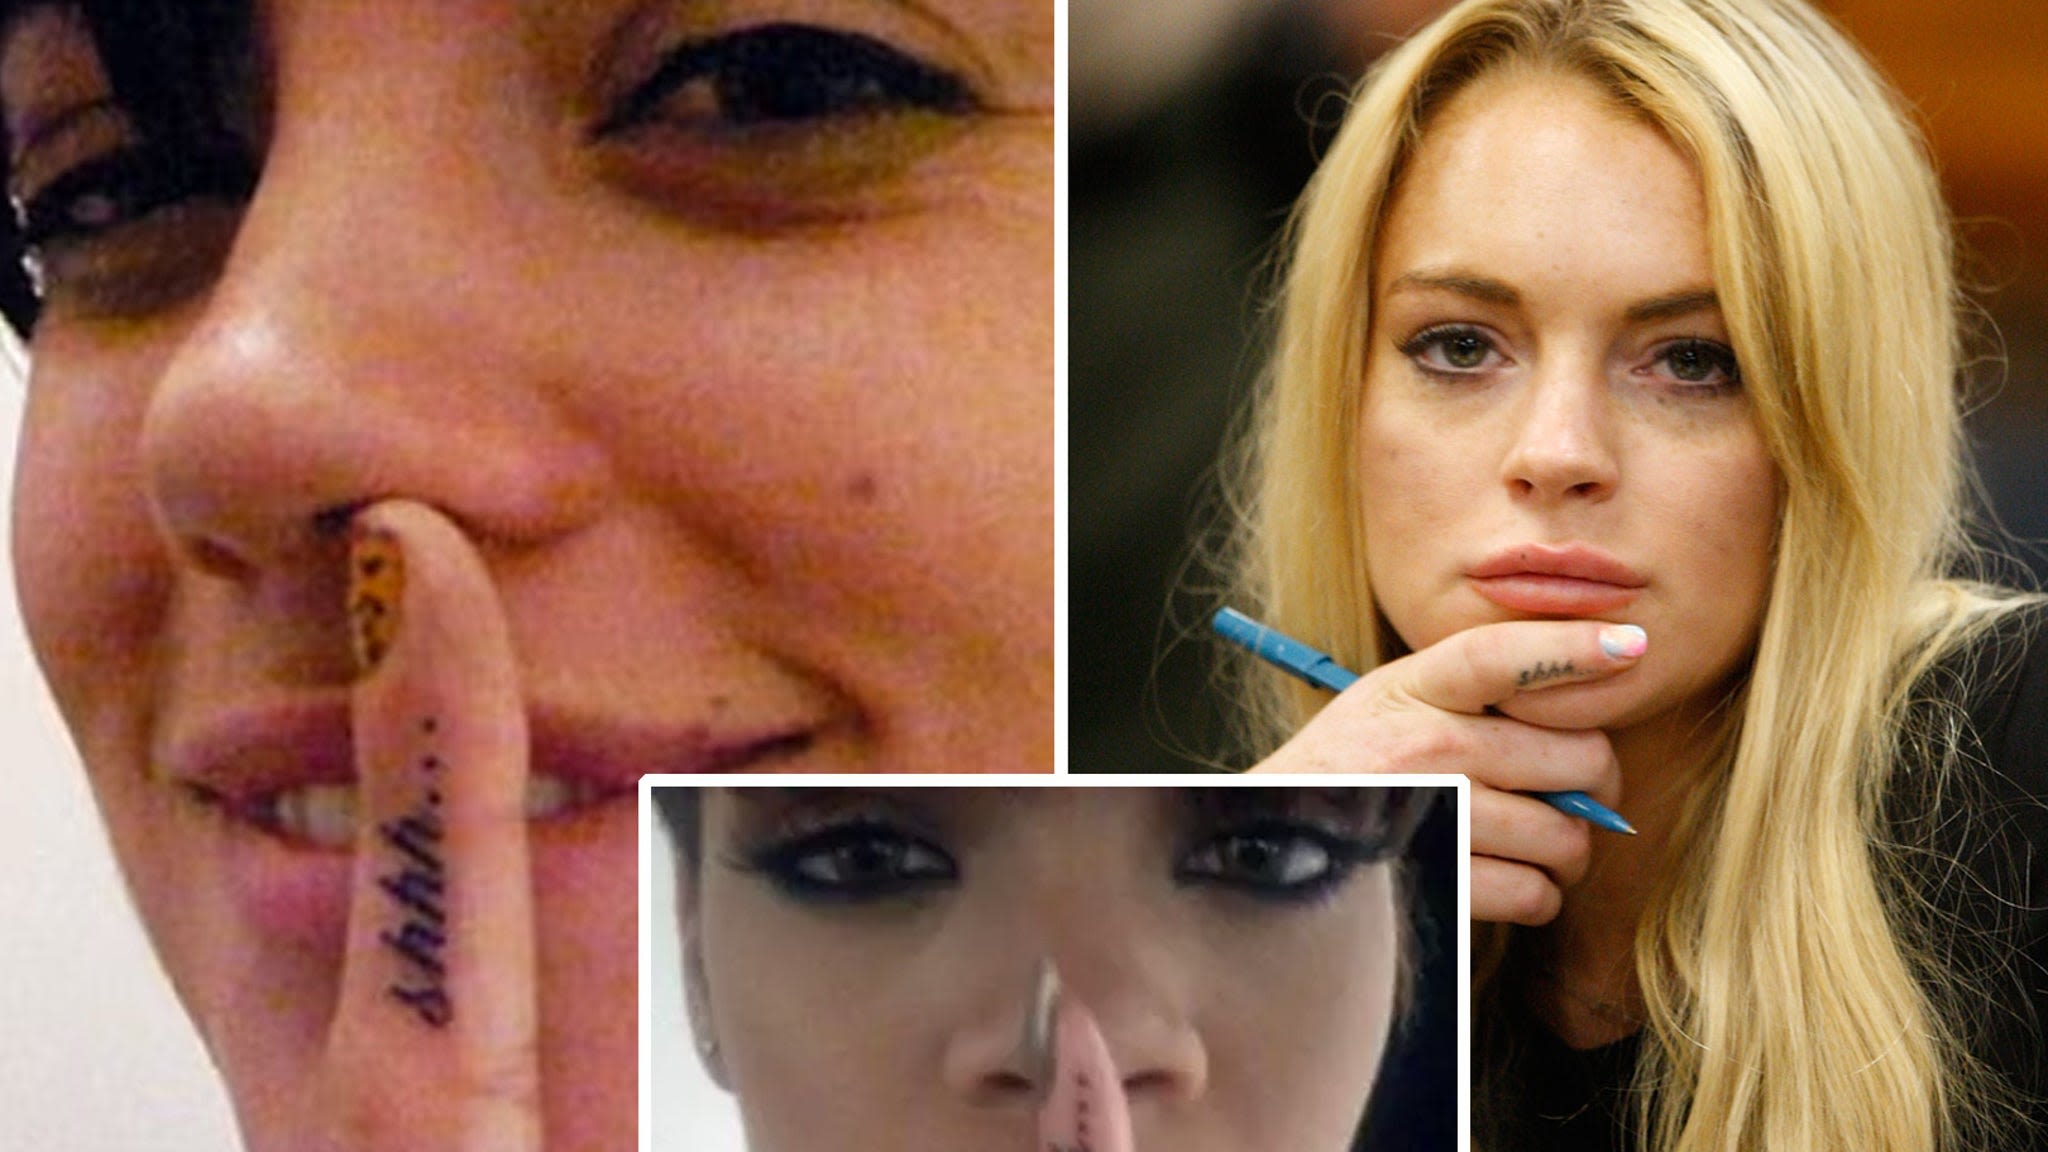 Lily Allen 'Escaped' Hotel with Lindsay Lohan to Get Matching Tattoos, Same As Rihanna's